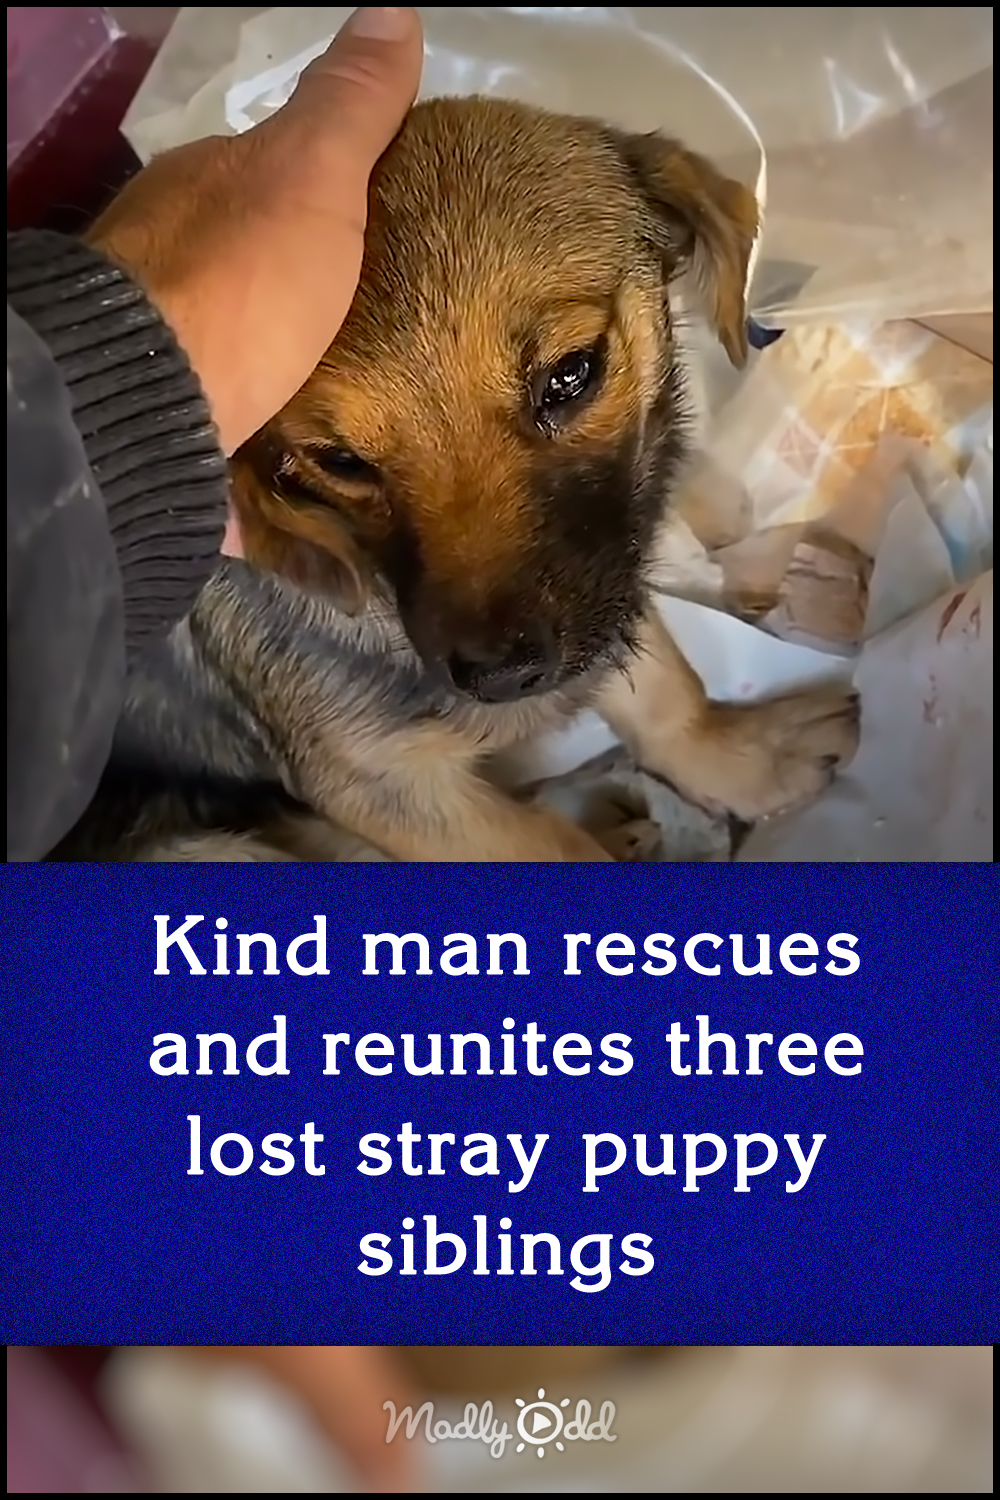 Kind man rescues and reunites three lost stray puppy siblings